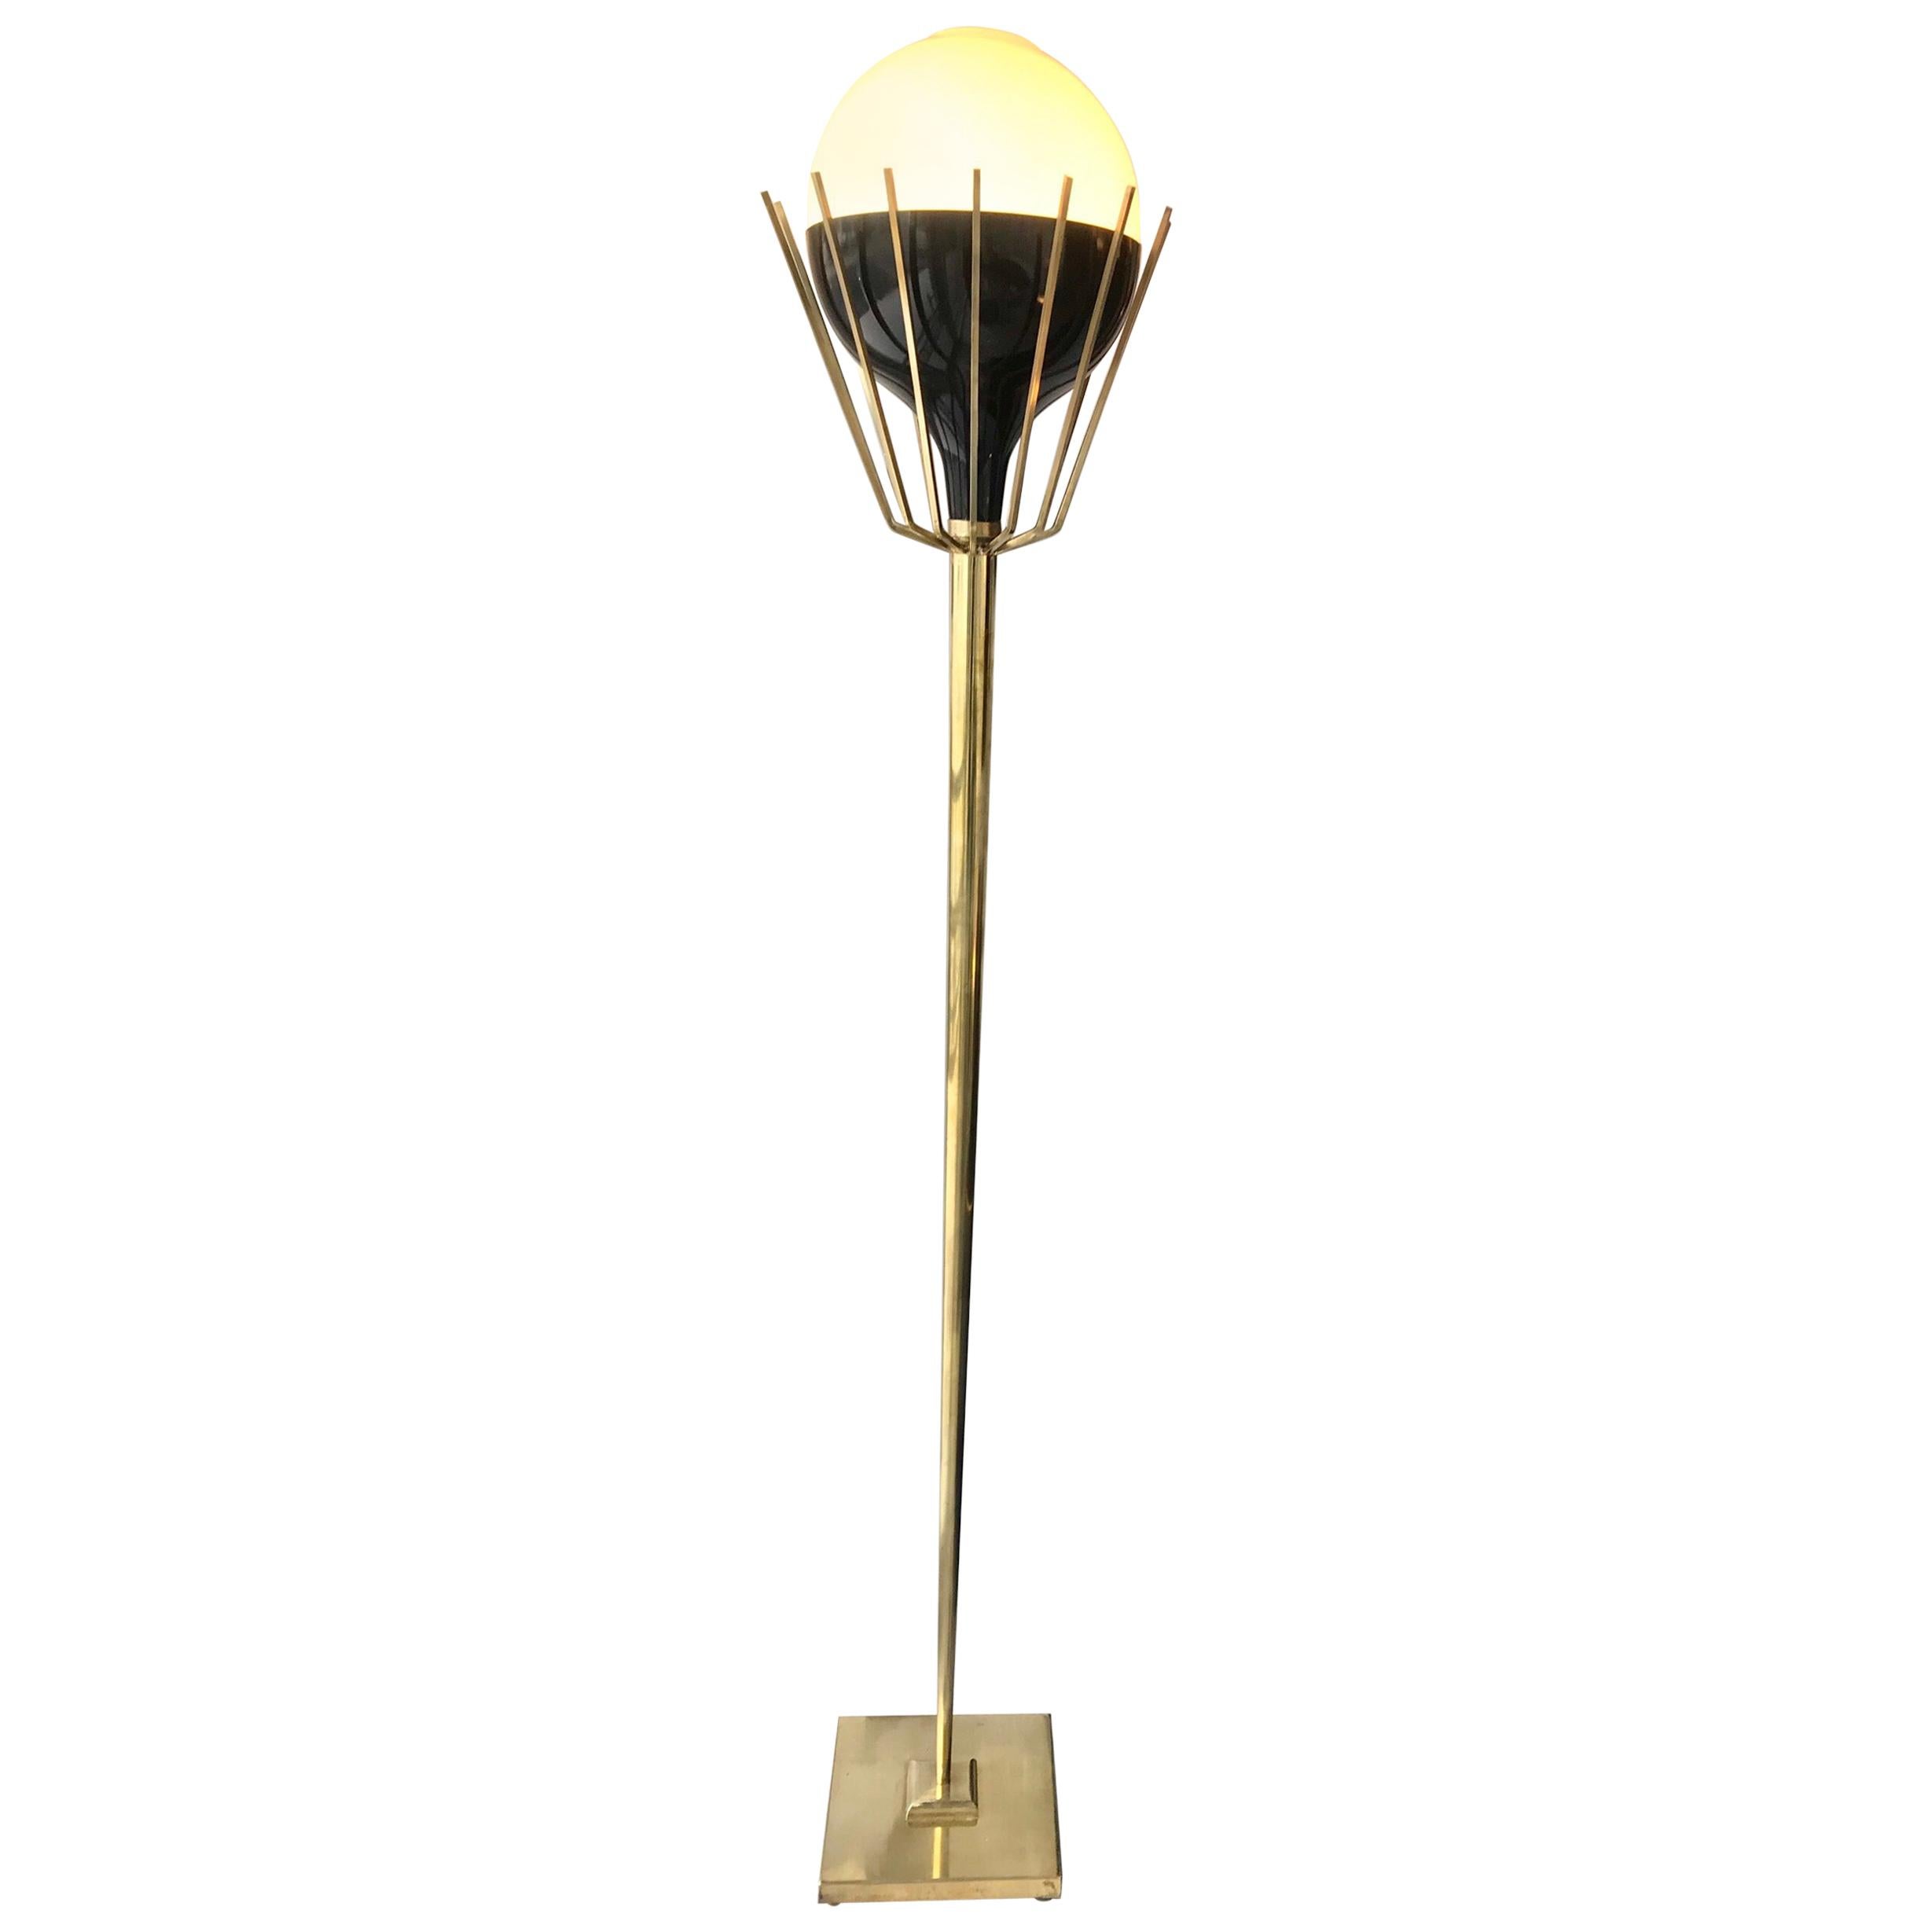 Pair of Mid-Century Modern Brass Floor Lamps with Glass Globes